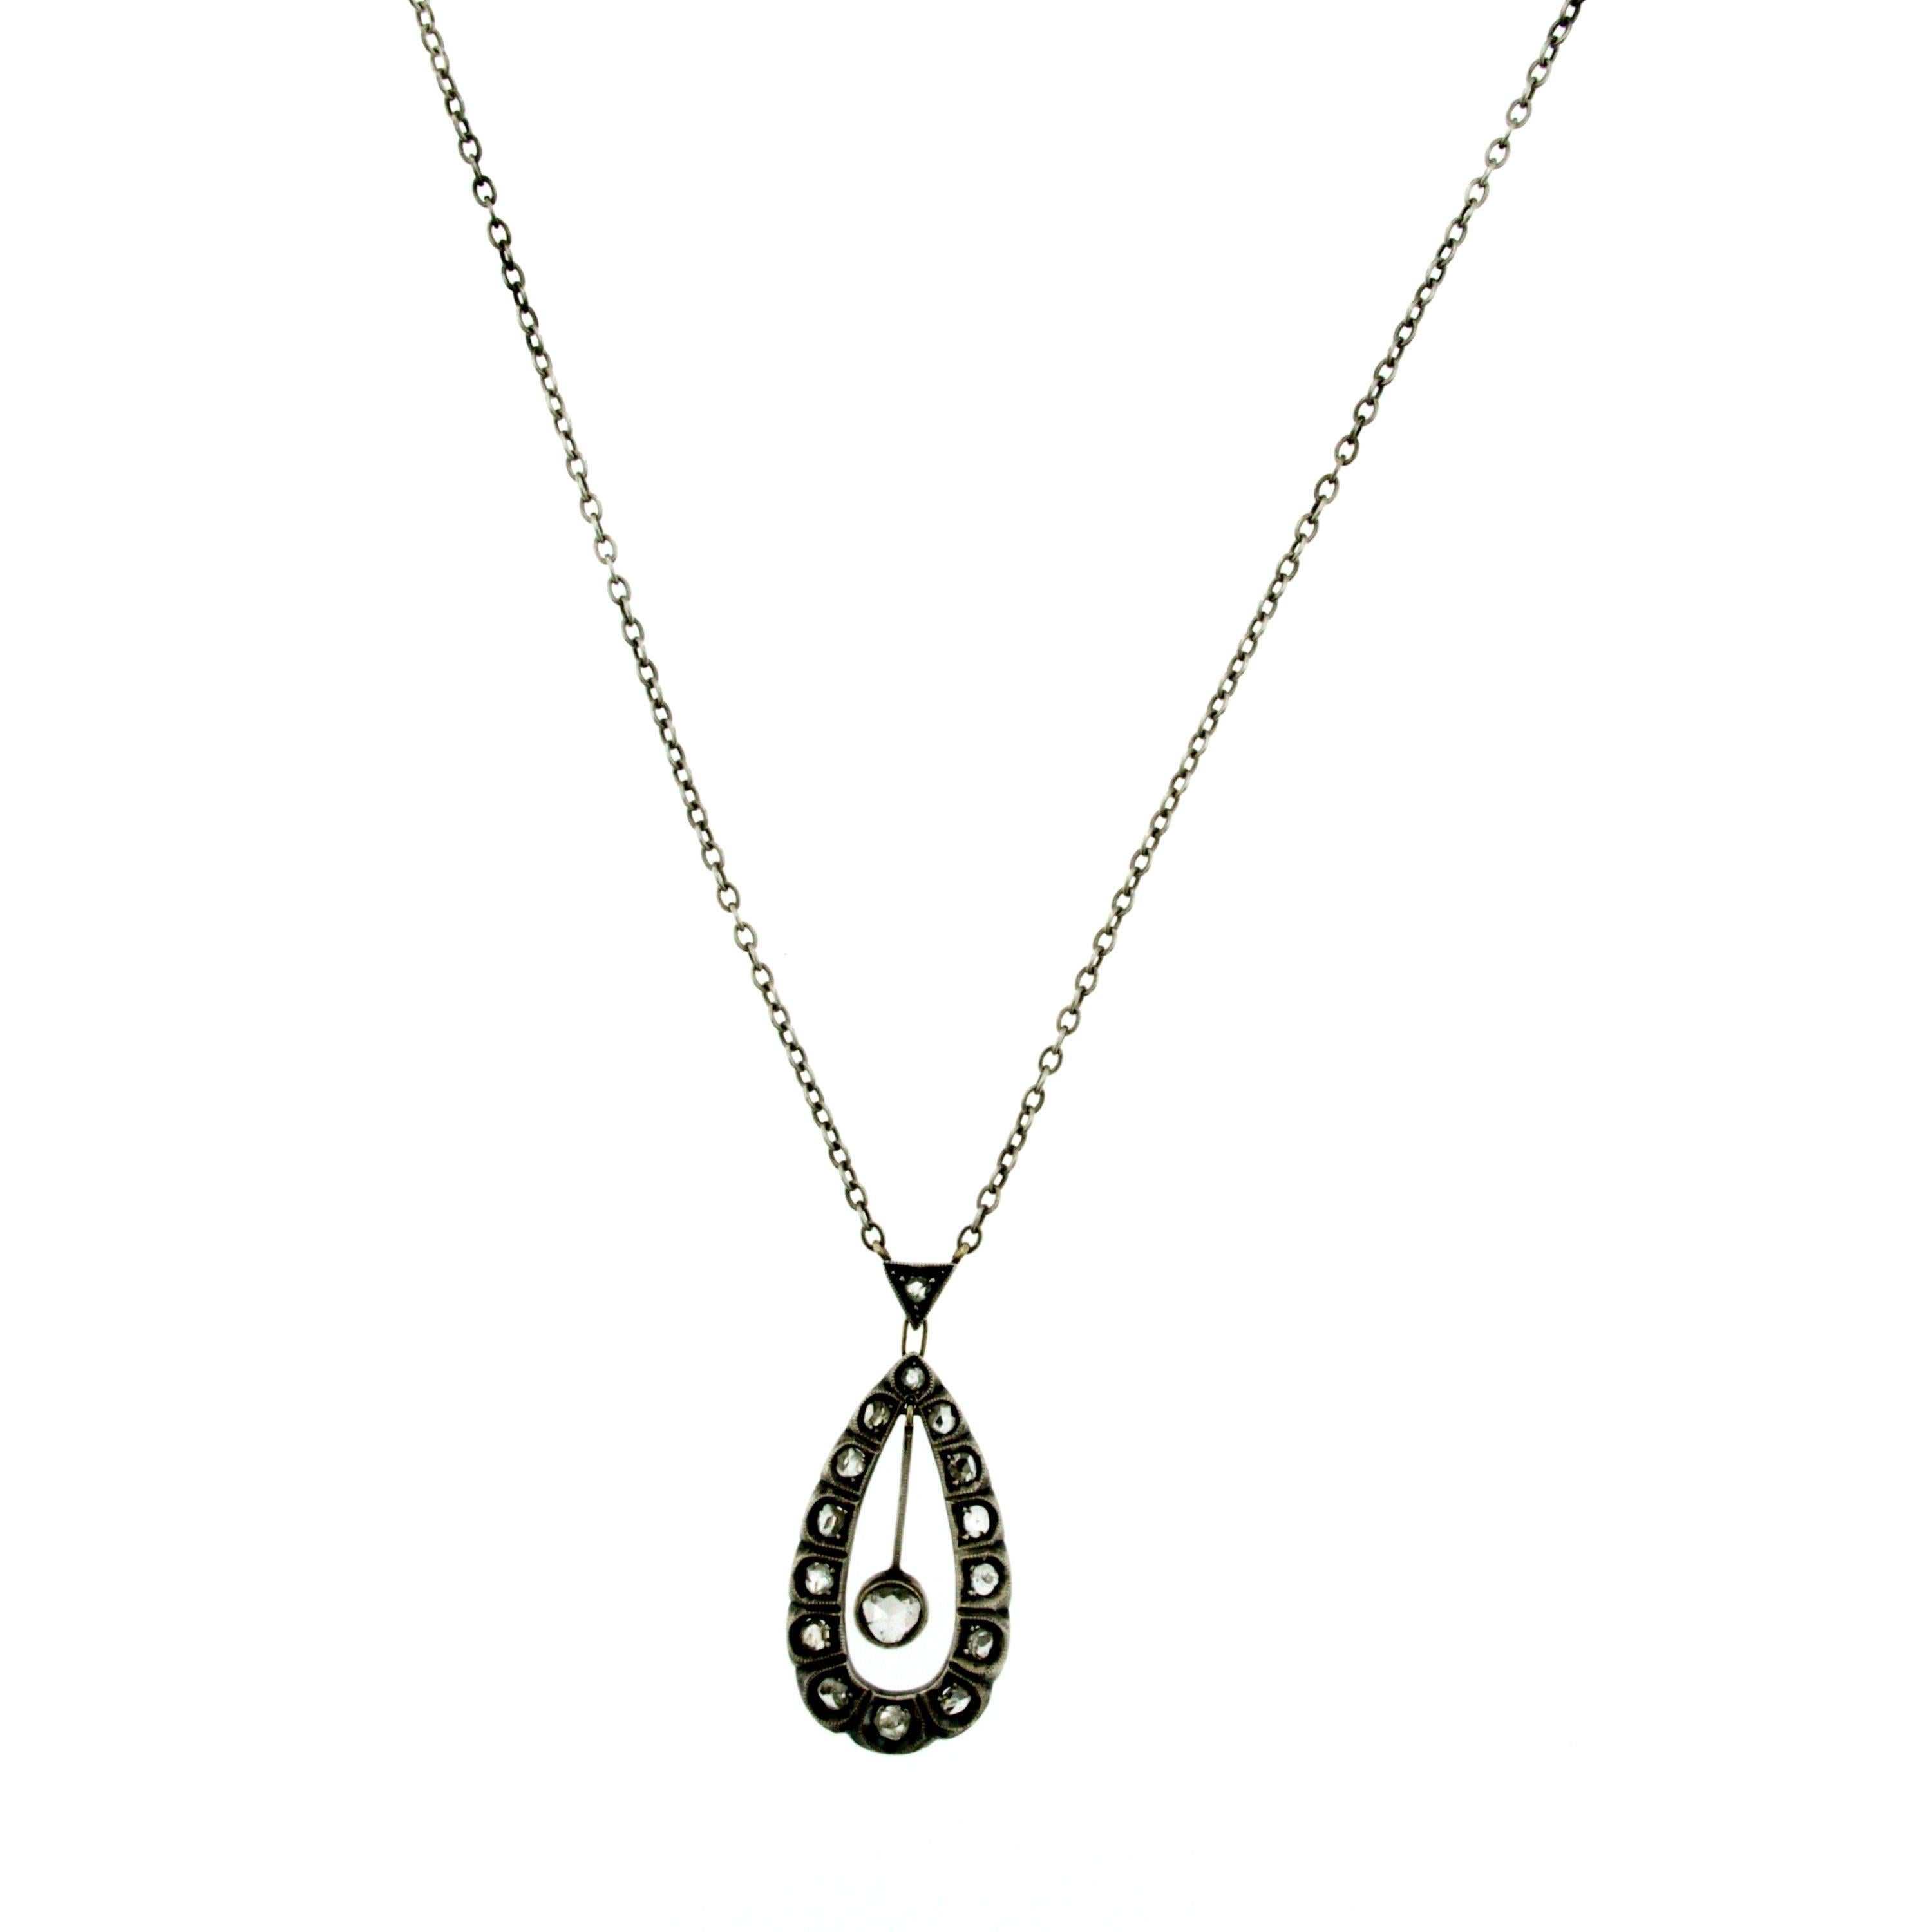 A fascinating Victorian period diamond pendant necklace crafted in 12k white Gold and Silver. 
Beautifully hand crafted, this pendant features a central diamond encircled by rose cut diamonds for a total weight of approx 0.60 carats. 
Circa